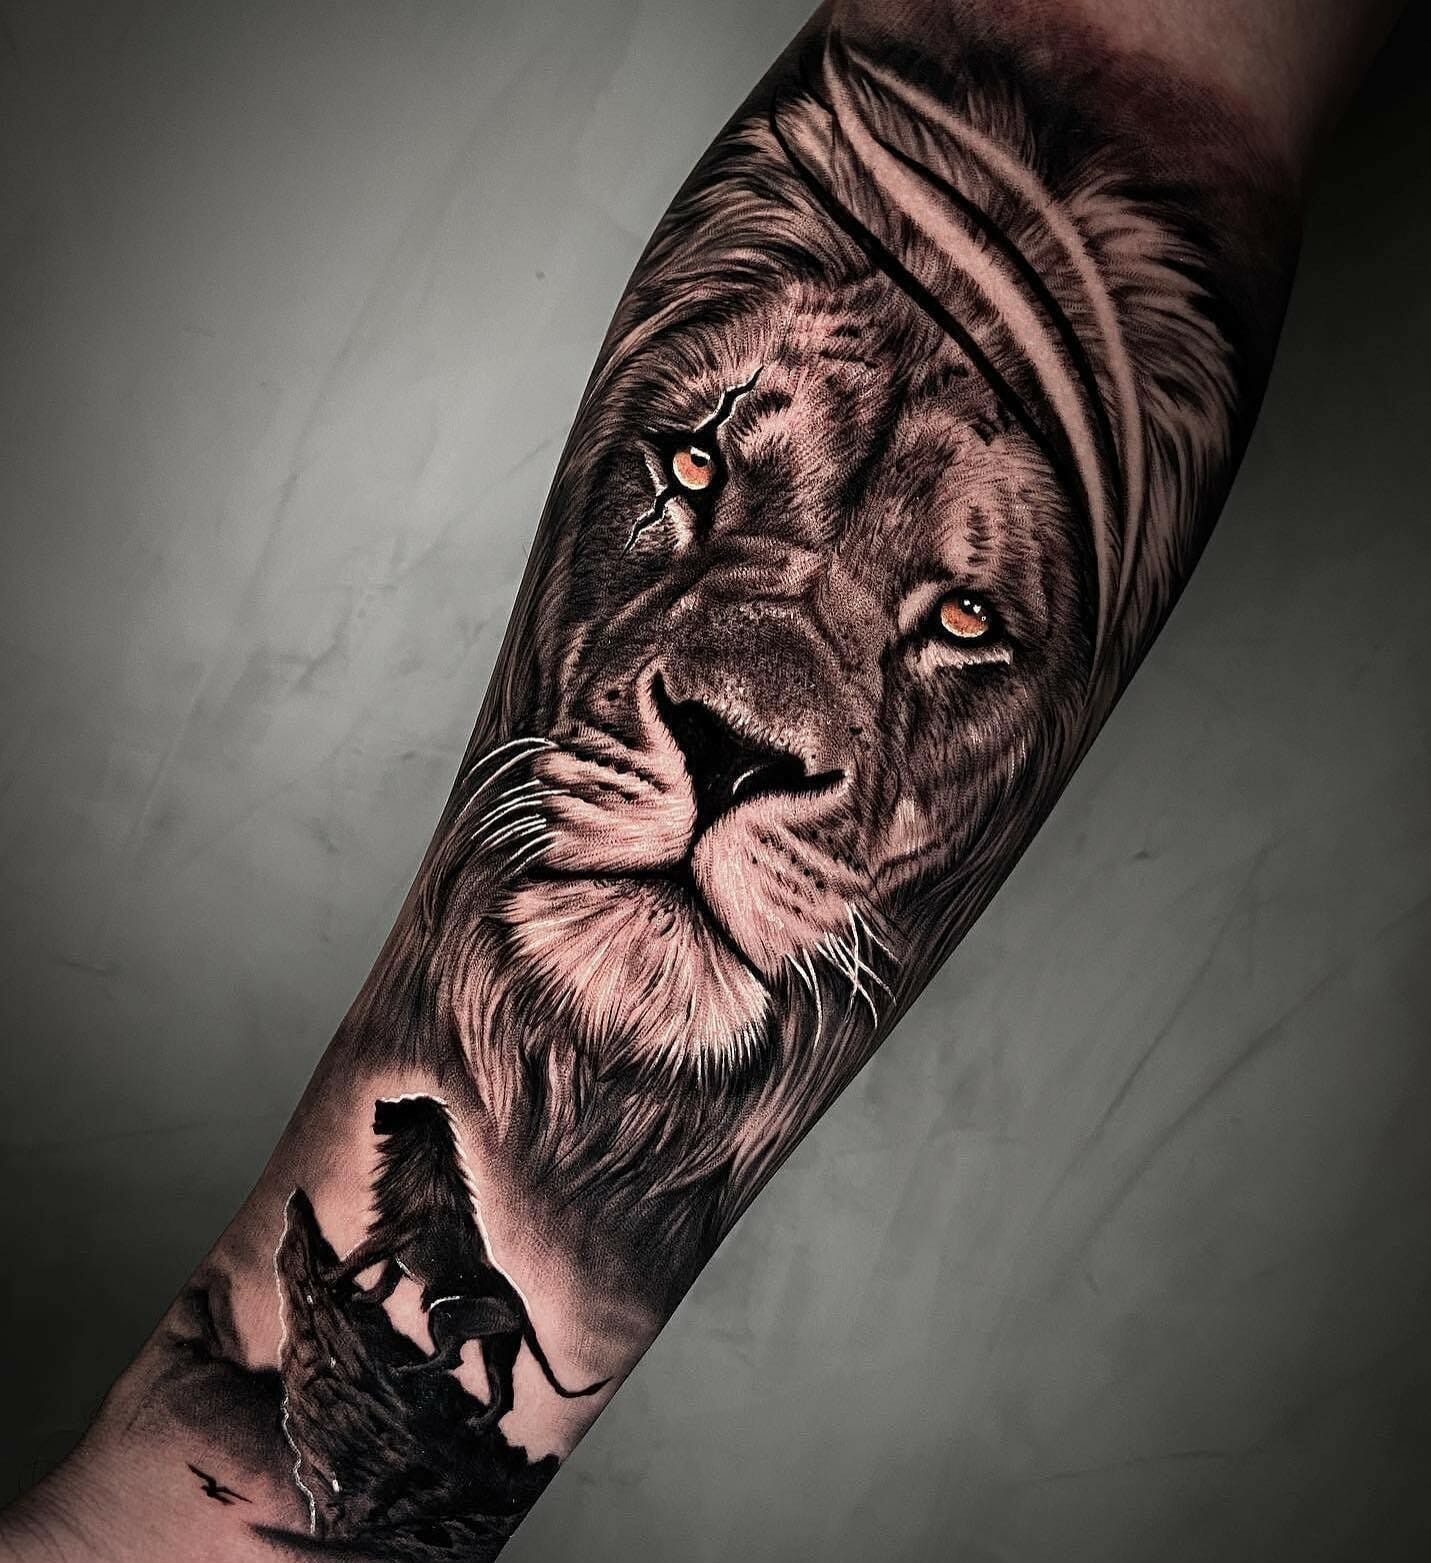 10+ Lion Tattoo On Forearm Ideas You'll Have To See To Believe! - alexie